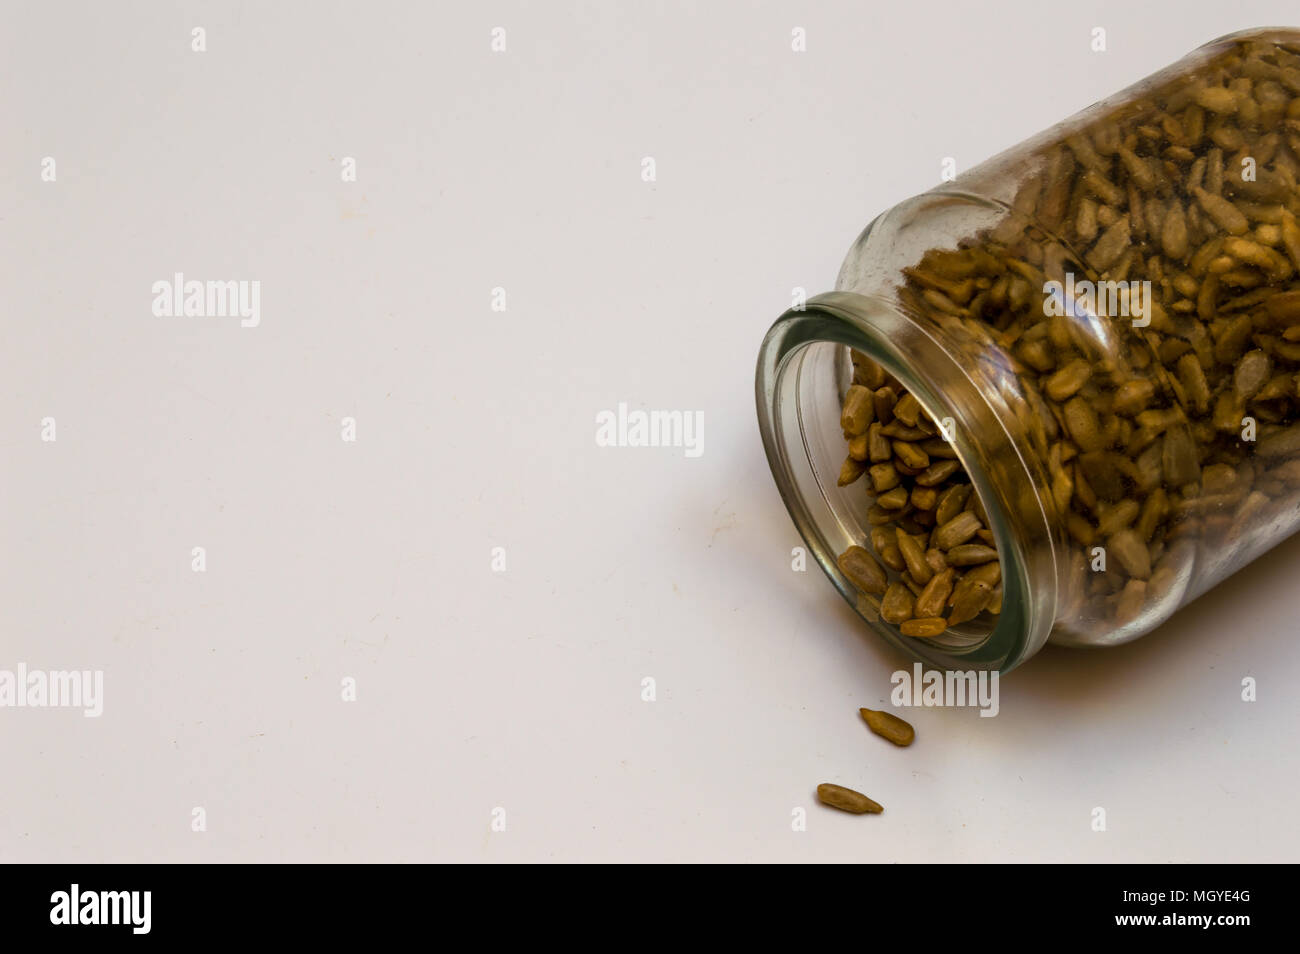 Vintage glass jar filled with peeled sunflower seeds and spilled. Food isolated on white background with space to ad text or elements. Stock Photo